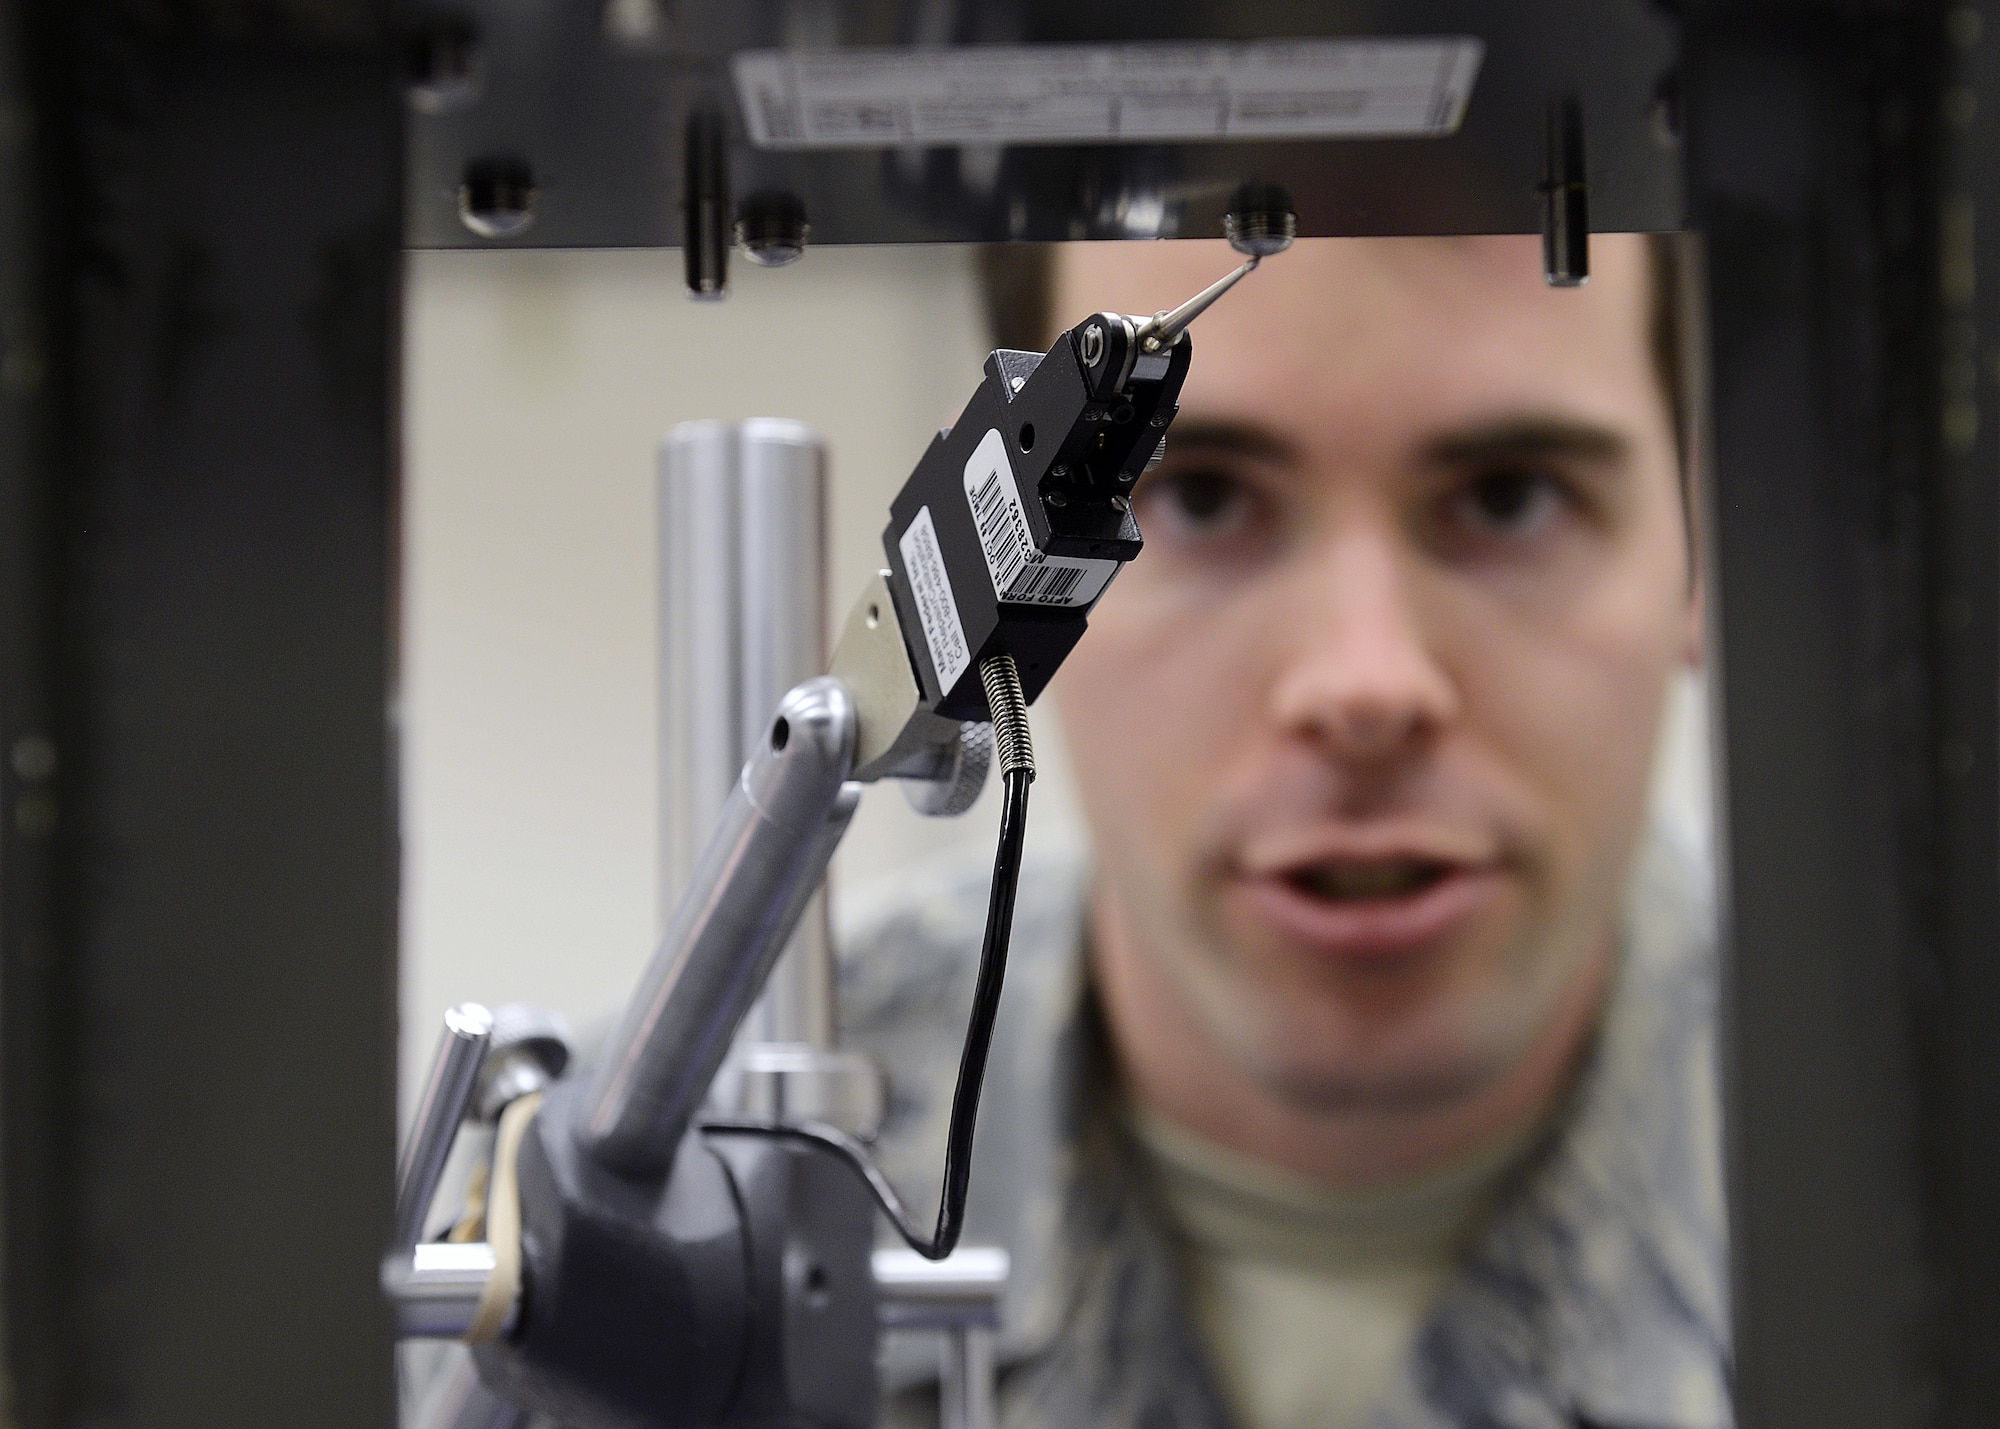 Senior Airman Evan Caso checks the setscrew height on a rate sensor unit boresight, Feb. 10, 2015, at Aviano Air Base, Italy. Precision measurement equipment laboratory (PMEL) technician’s calibrate and repair measurement and diagnostic equipment to provide customers with reliable, safe and accurate equipment that meets and exceeds expectations. Caso is a 31st Maintenance Squadron PMEL journeyman.  (U.S. Air Force photo/Airman 1st Class Ryan Conroy)